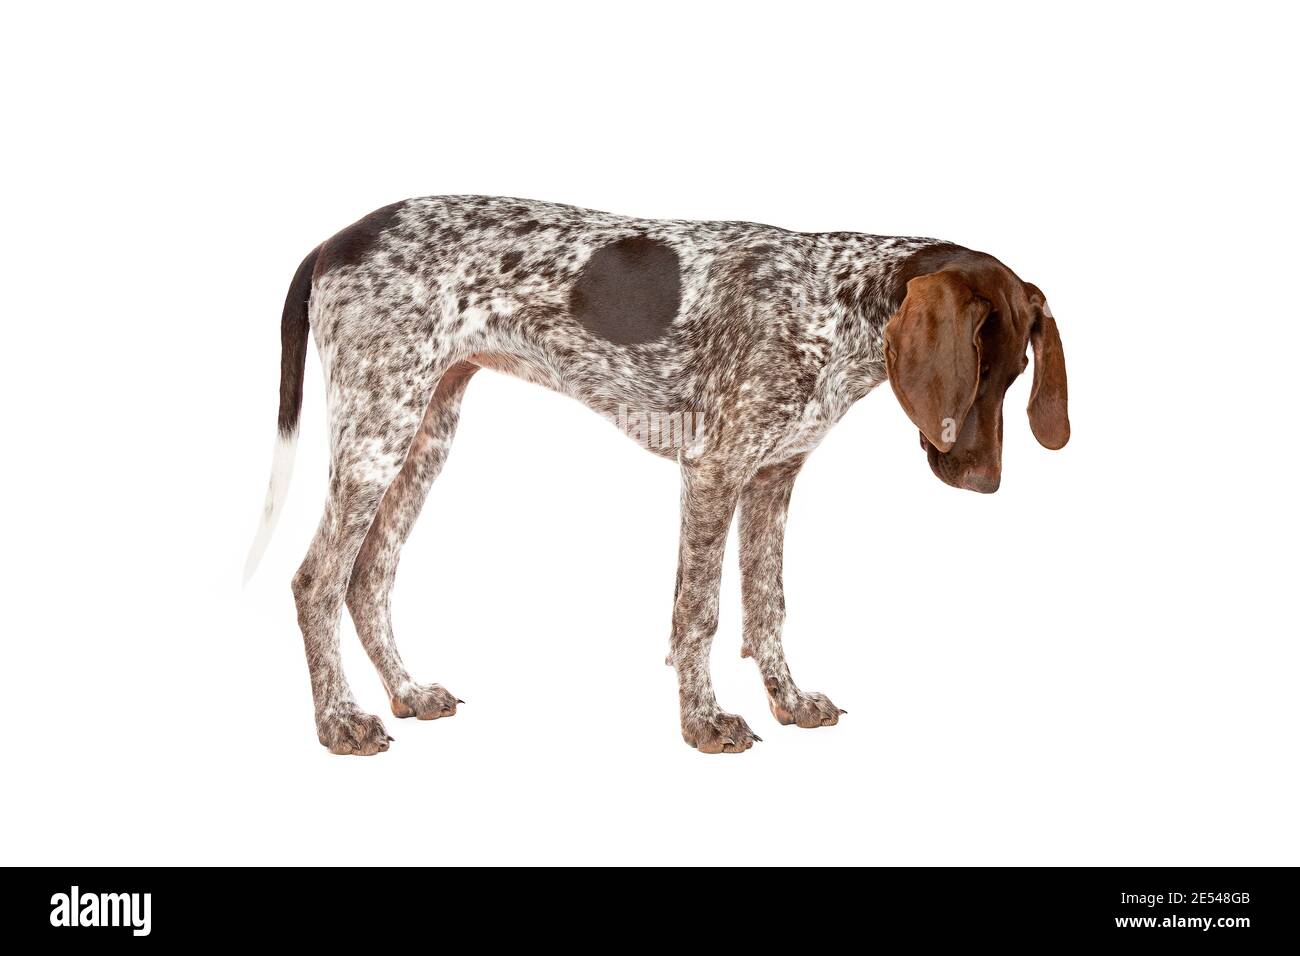 German Short haired Pointer puppy in front of a white background Stock Photo